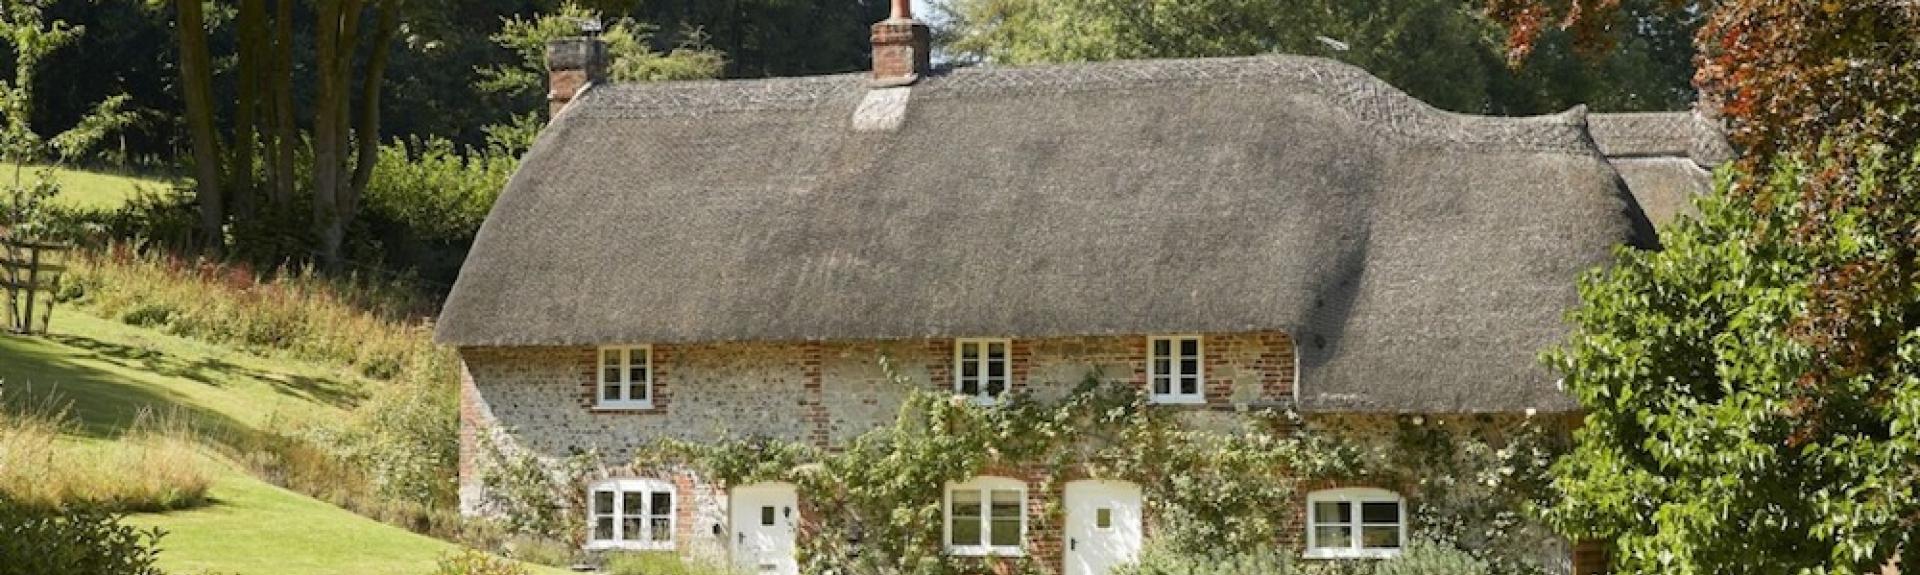 A large thatched cottage overlooks spacious, freshly-mown lawns.